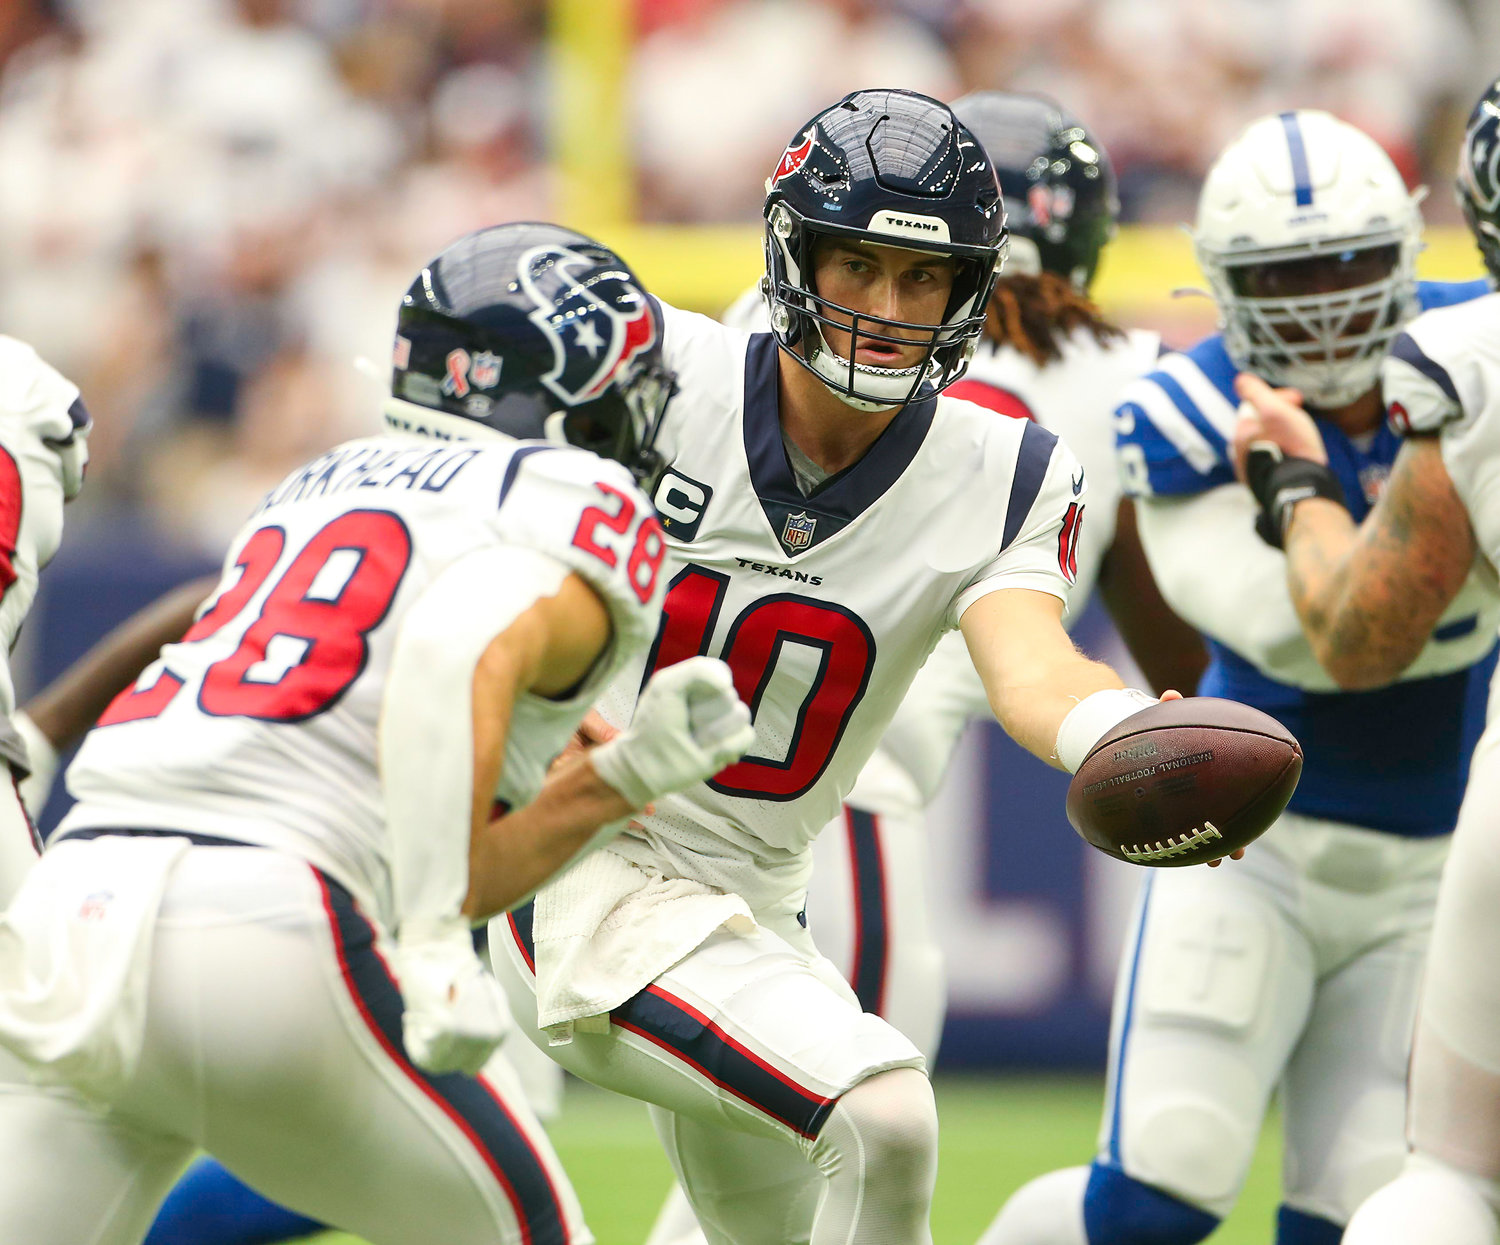 Houston Texans quarterback Davis Mills (10) hands the ball off to running back Rex Burkhead (28) during an NFL game between the Texans and the Colts on September 11, 2022 in Houston. The game ended in a 20-20 tie after a scoreless overtime period.